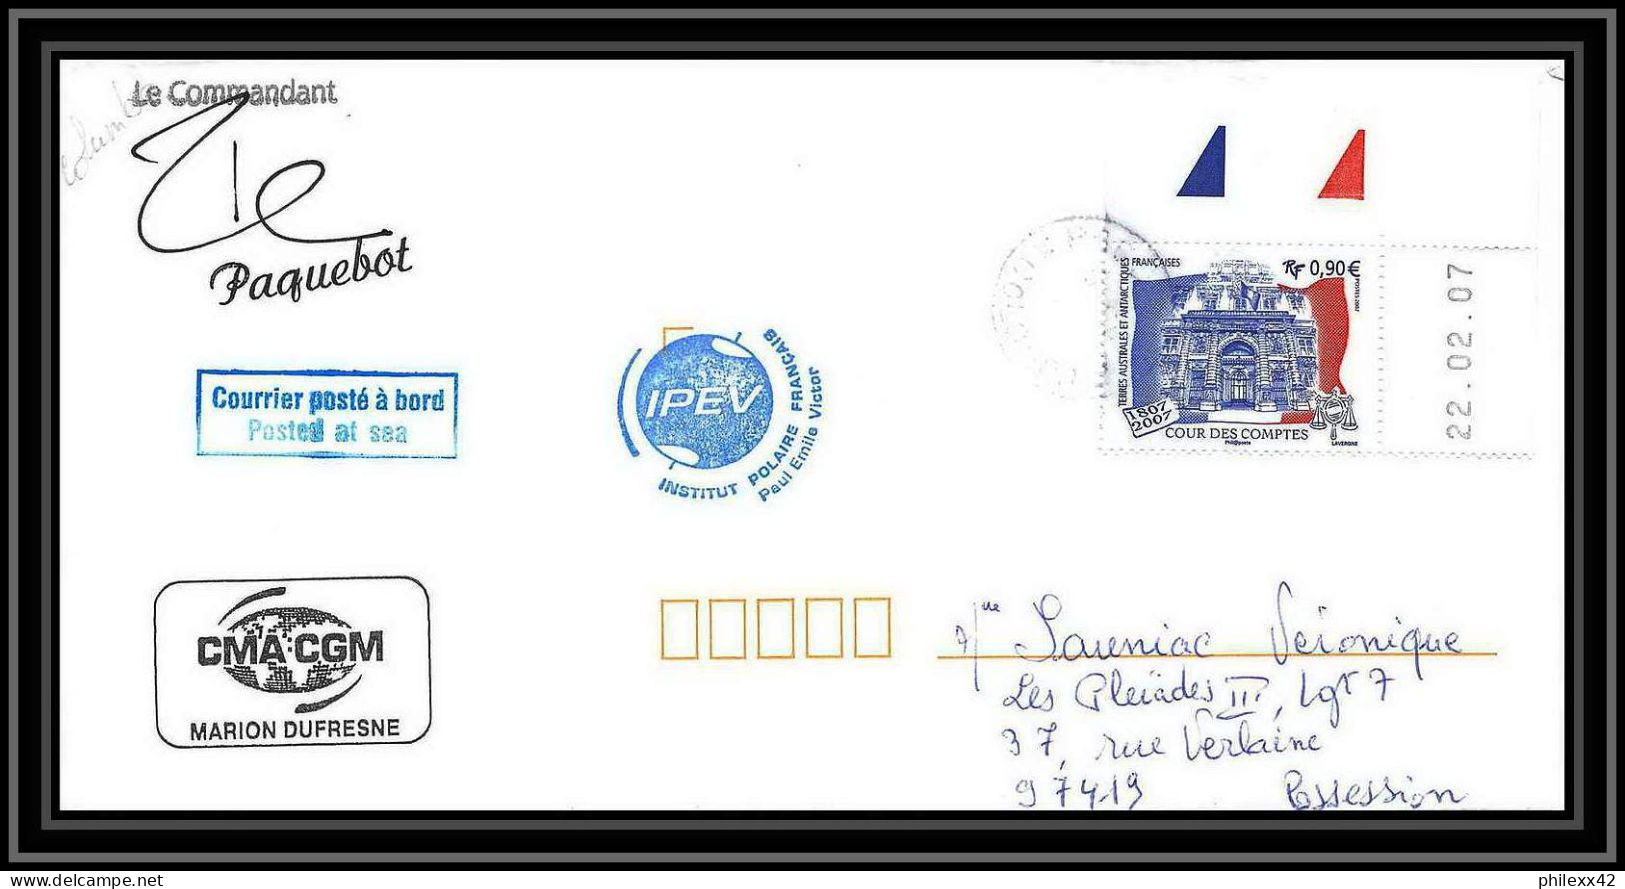 2693 ANTARCTIC Terres Australes TAAF Lettre Cover Dufresne 2 Signé Signed IPEV Colombo 1/6/2007 N°471 Coin Daté - Spedizioni Antartiche